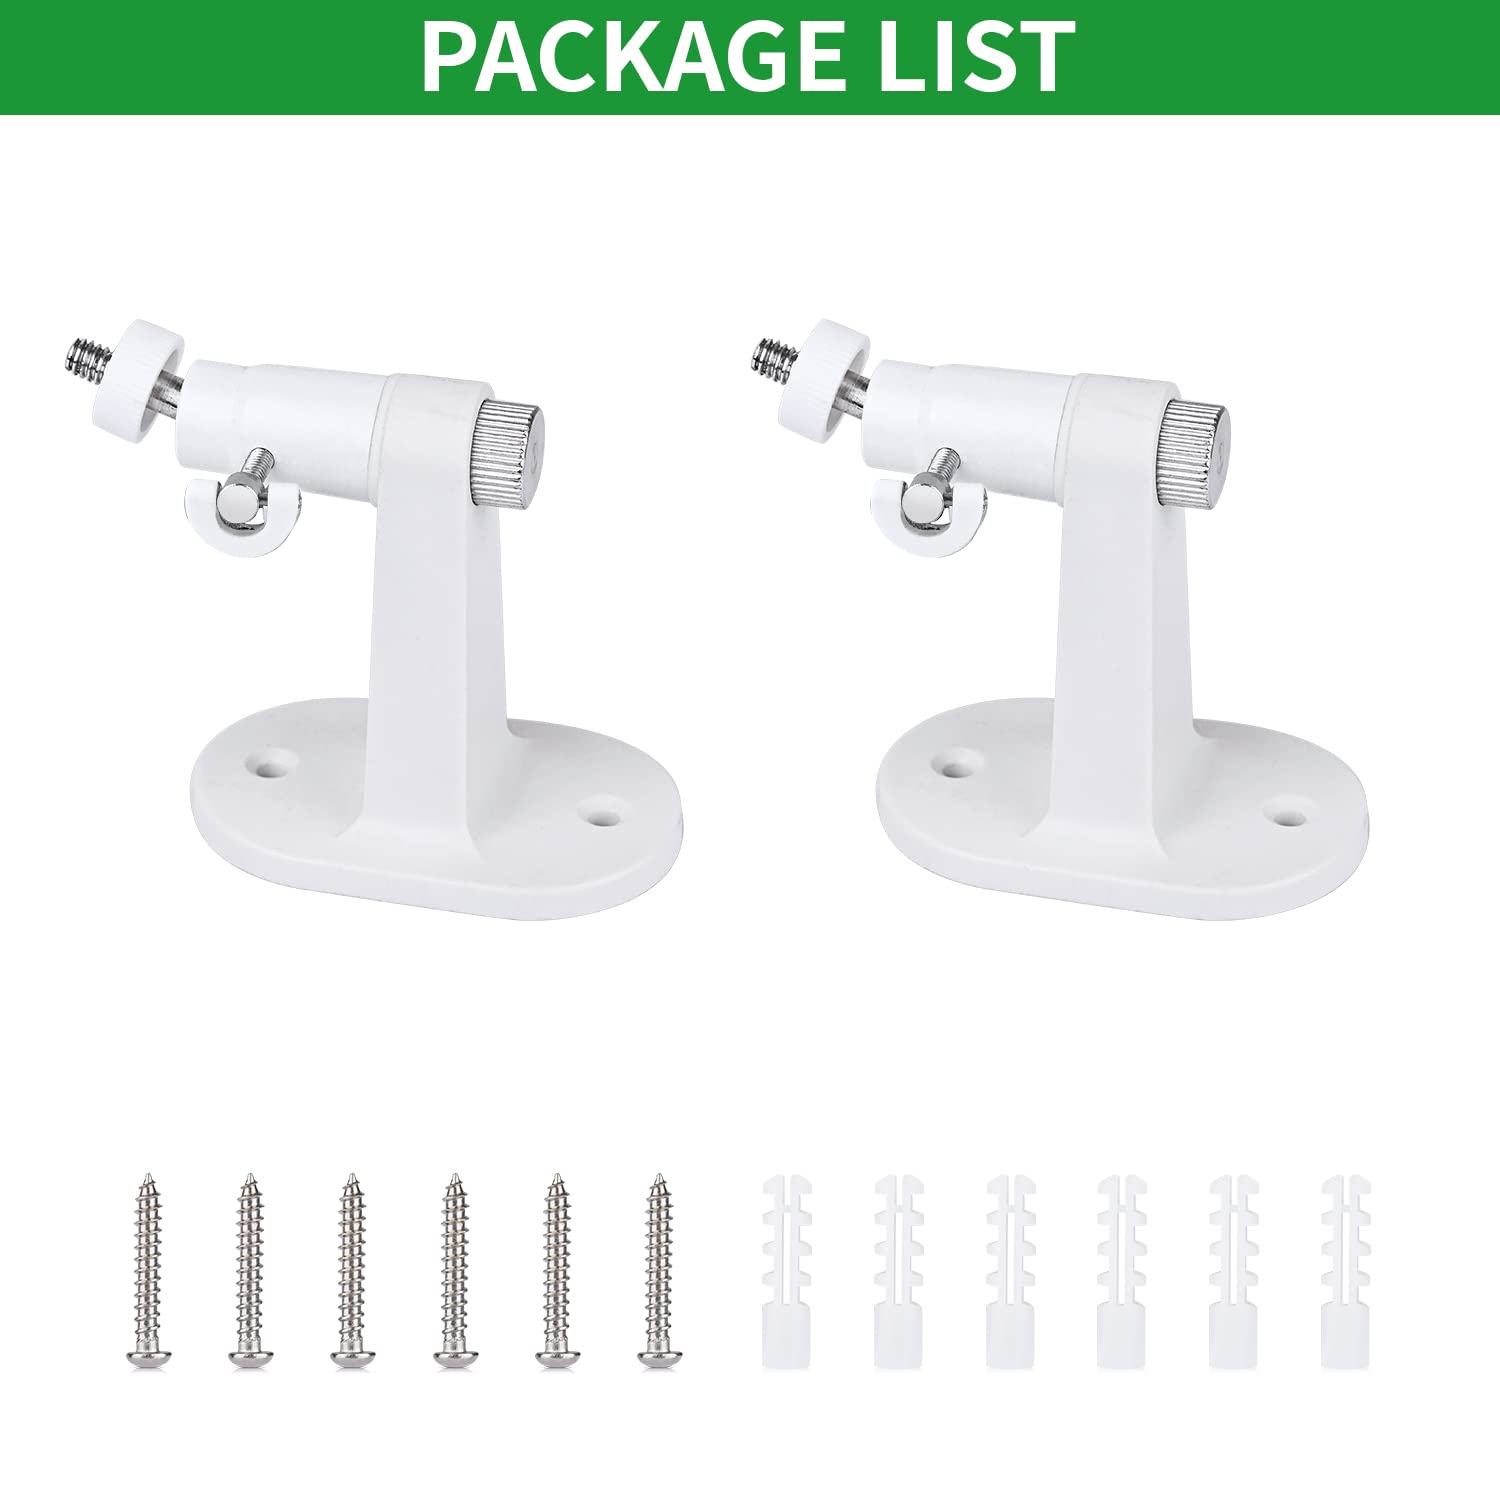 wochel 2Pack Adjustable Security Wall Mount Bracket for Google Nest Cam Outdoor or Indoor, Battery, Perfect View Angle for Your Security Camera System - White